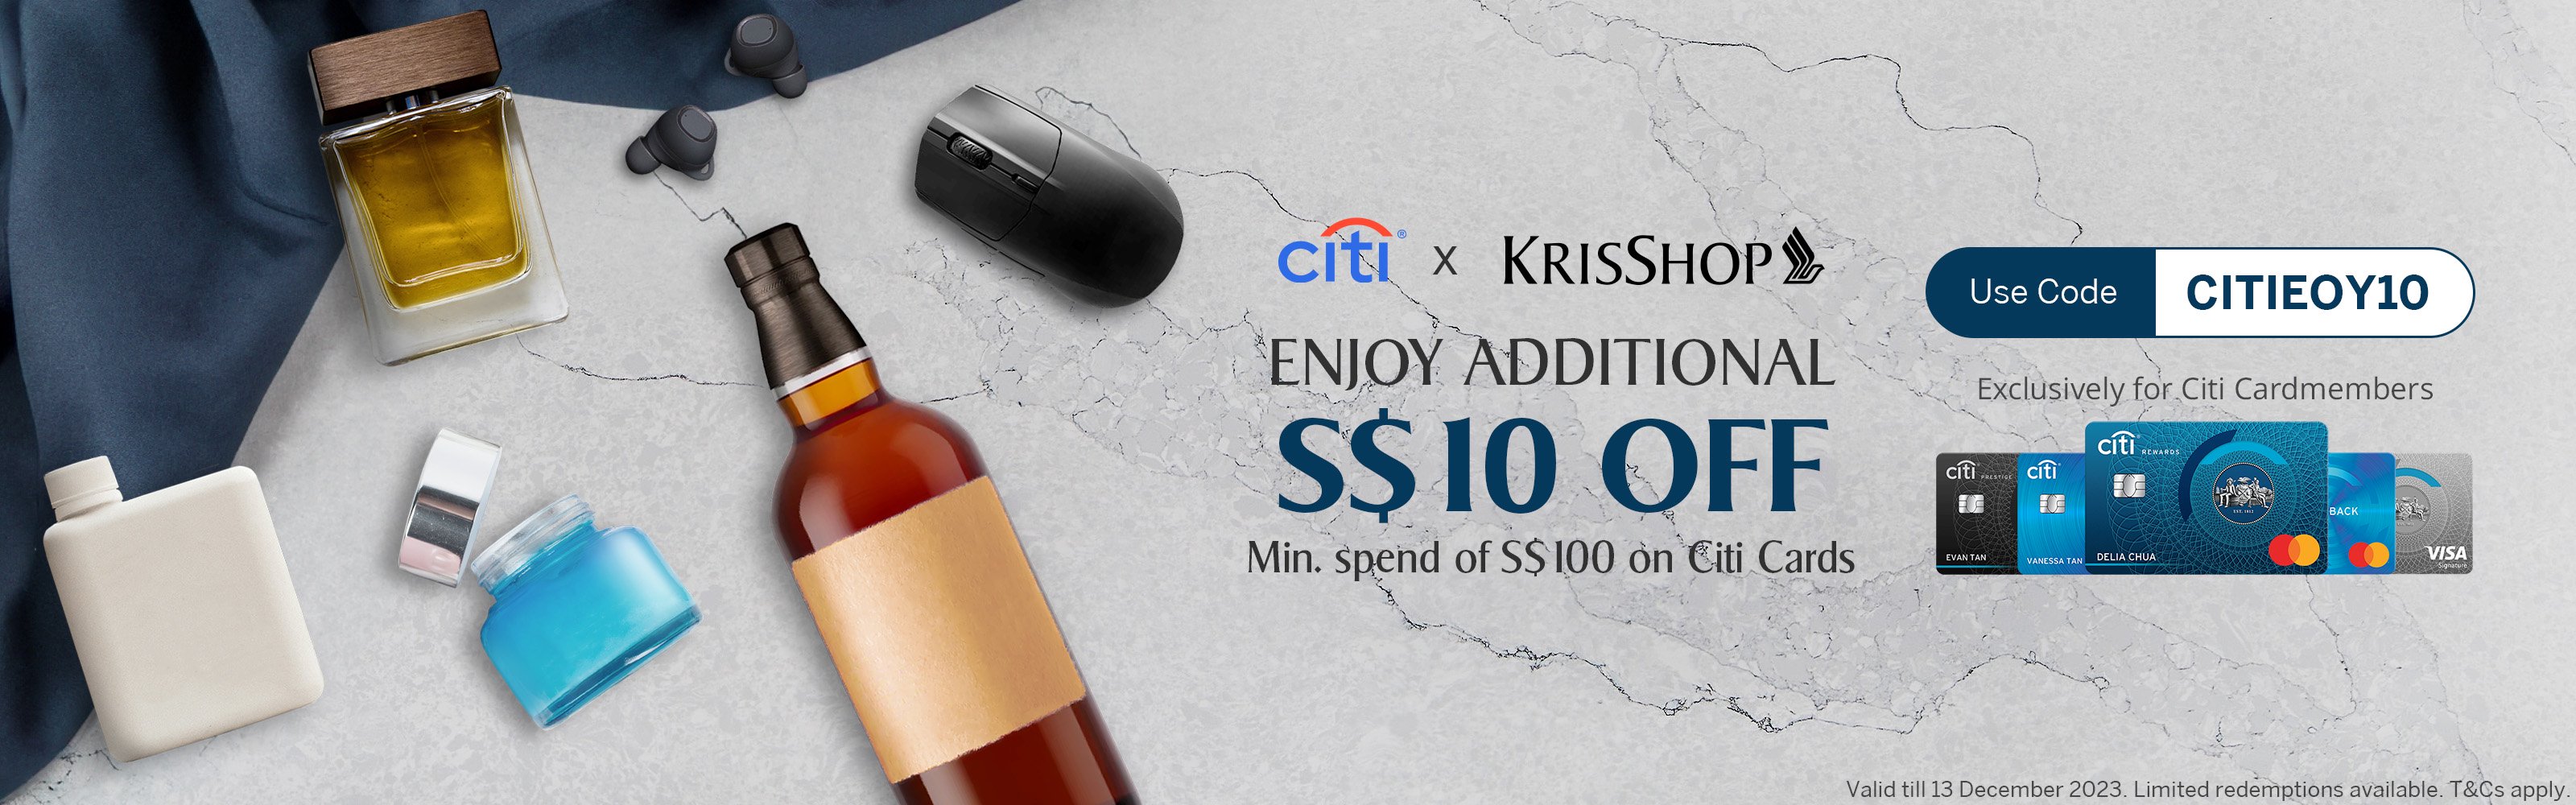 KrisShop x Citibank - S$10 off with min. spend S$100